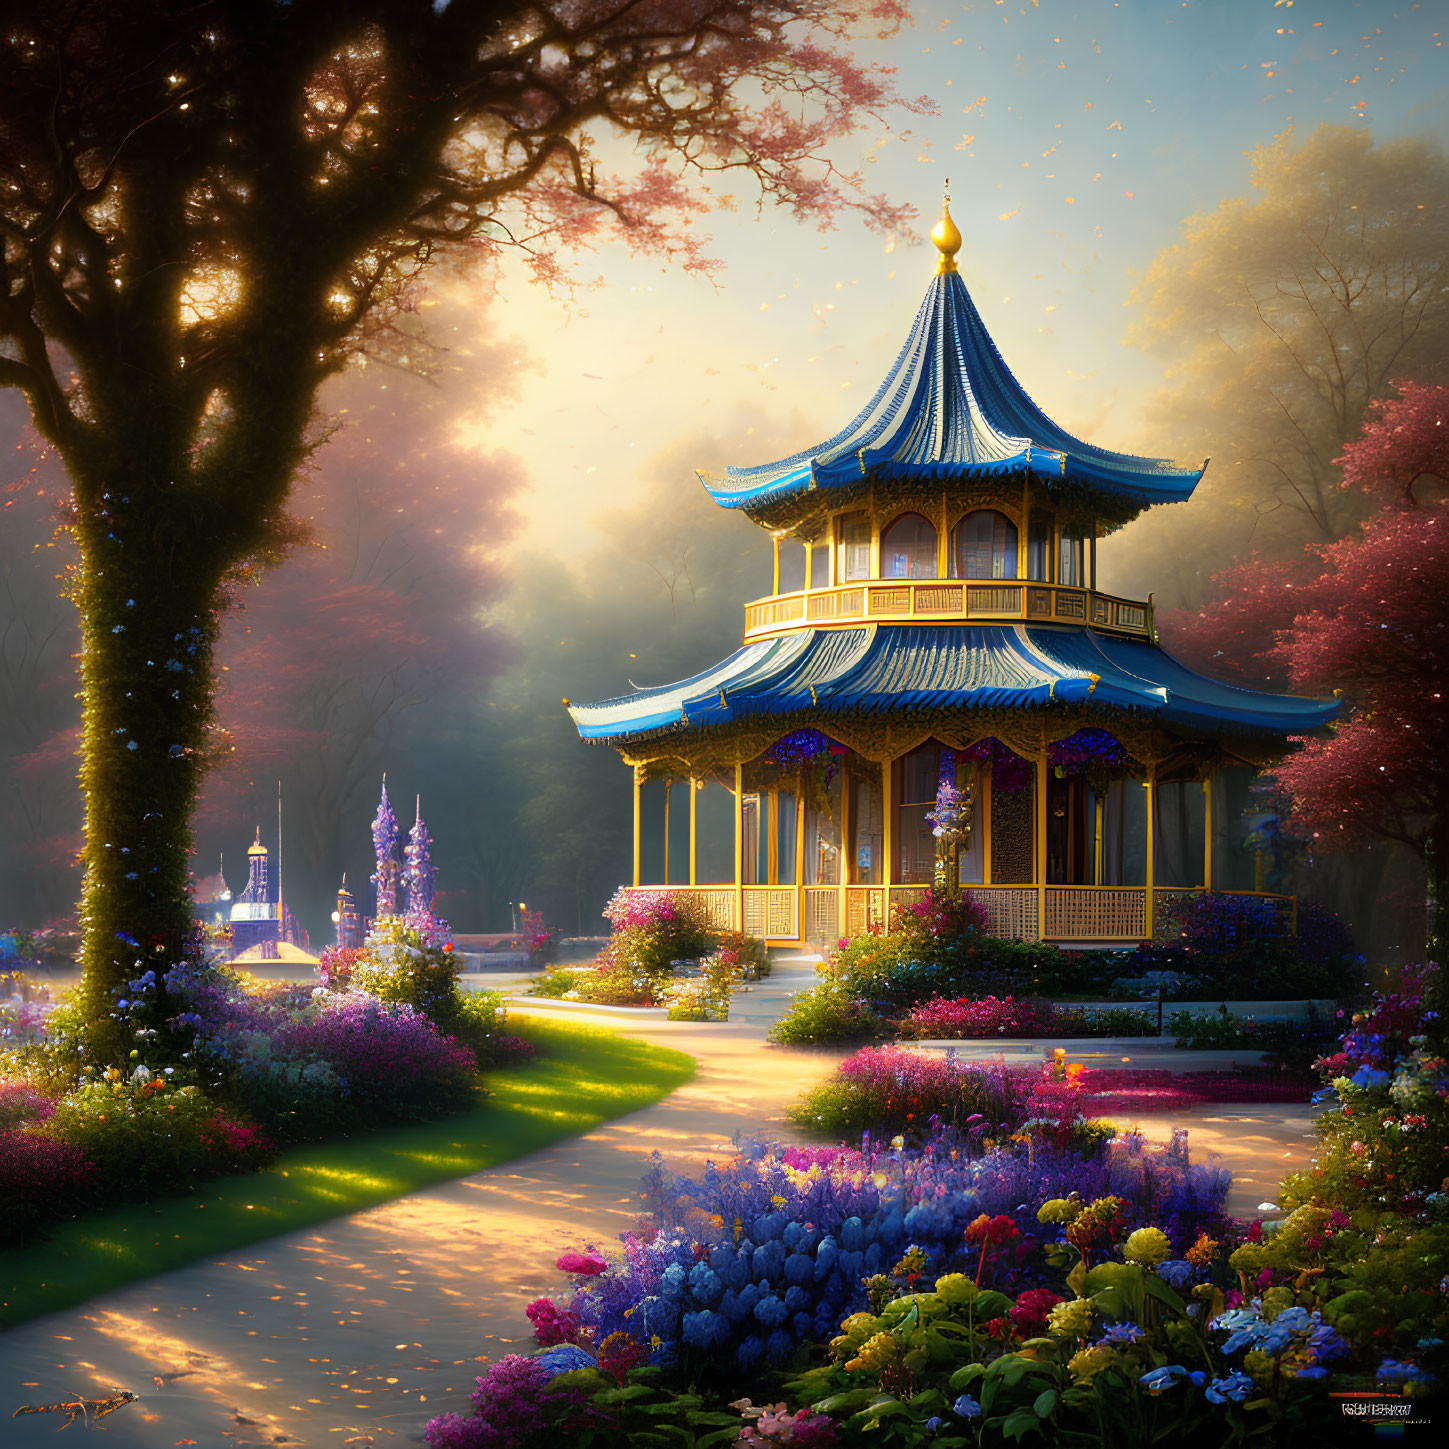 Traditional Asian-style pagoda in lush garden with blooming flowers and warm sunlight.